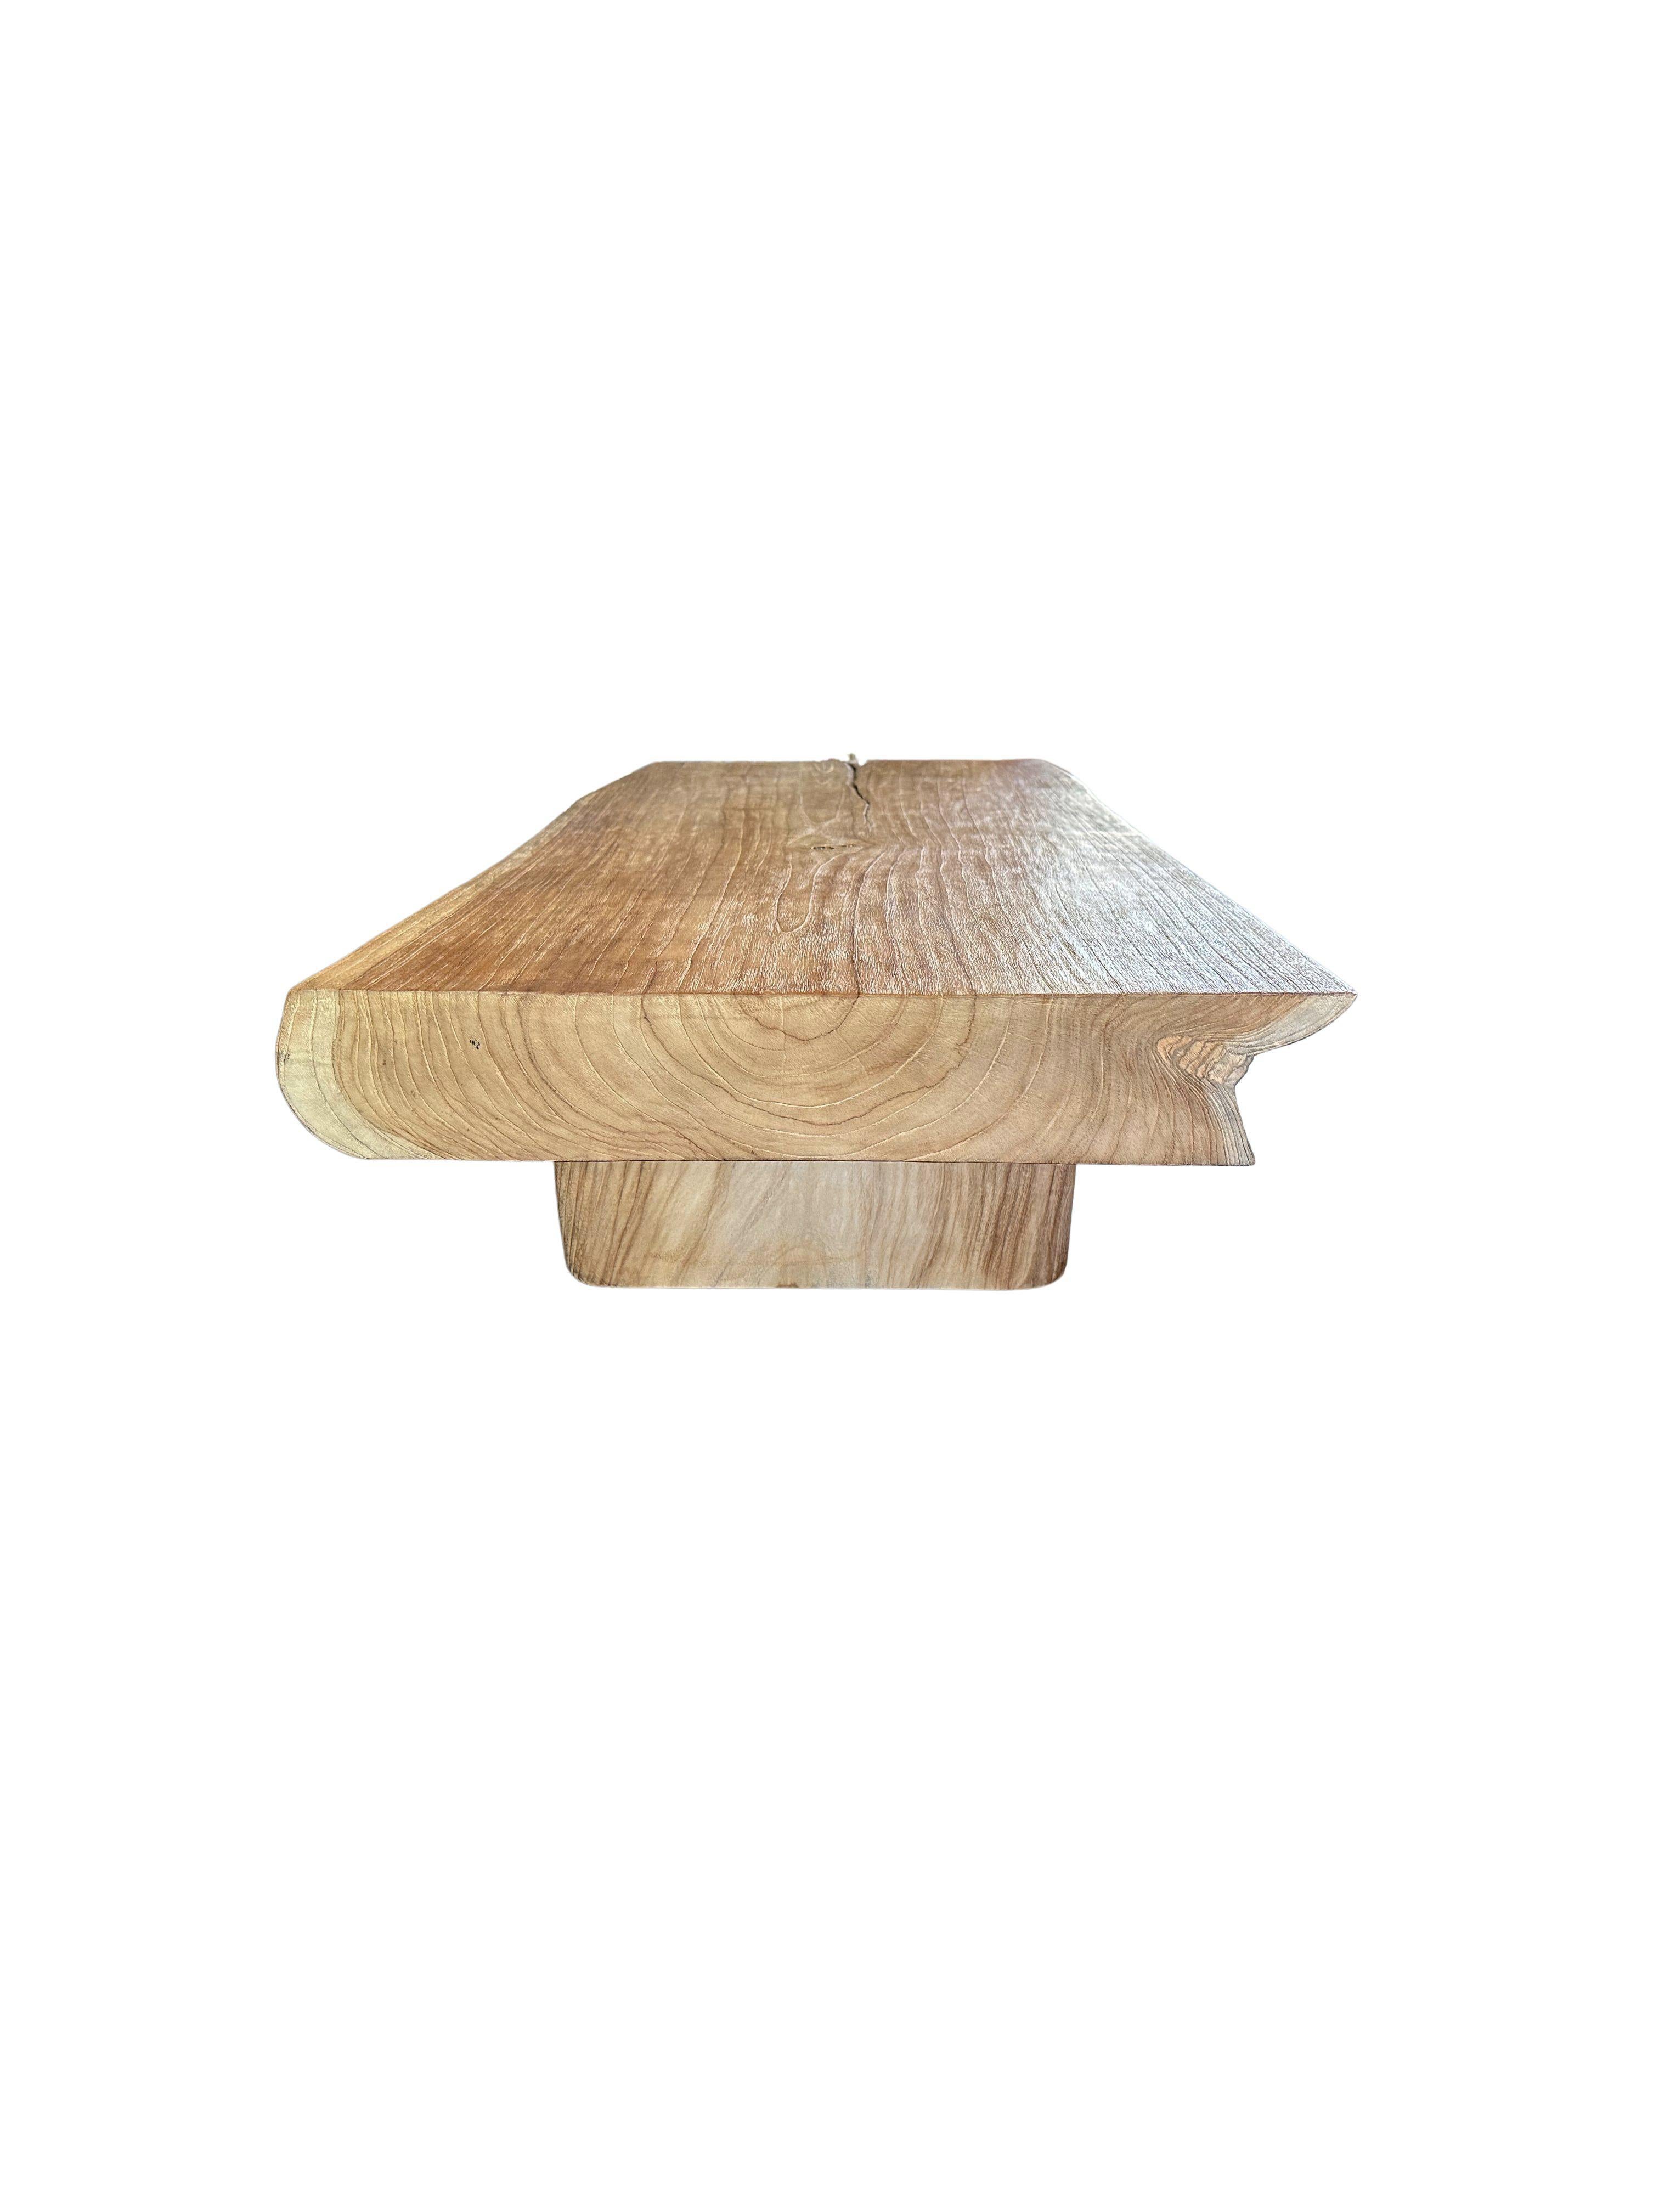 Indonesian Solid Teak Wood Table Modern Organic For Sale